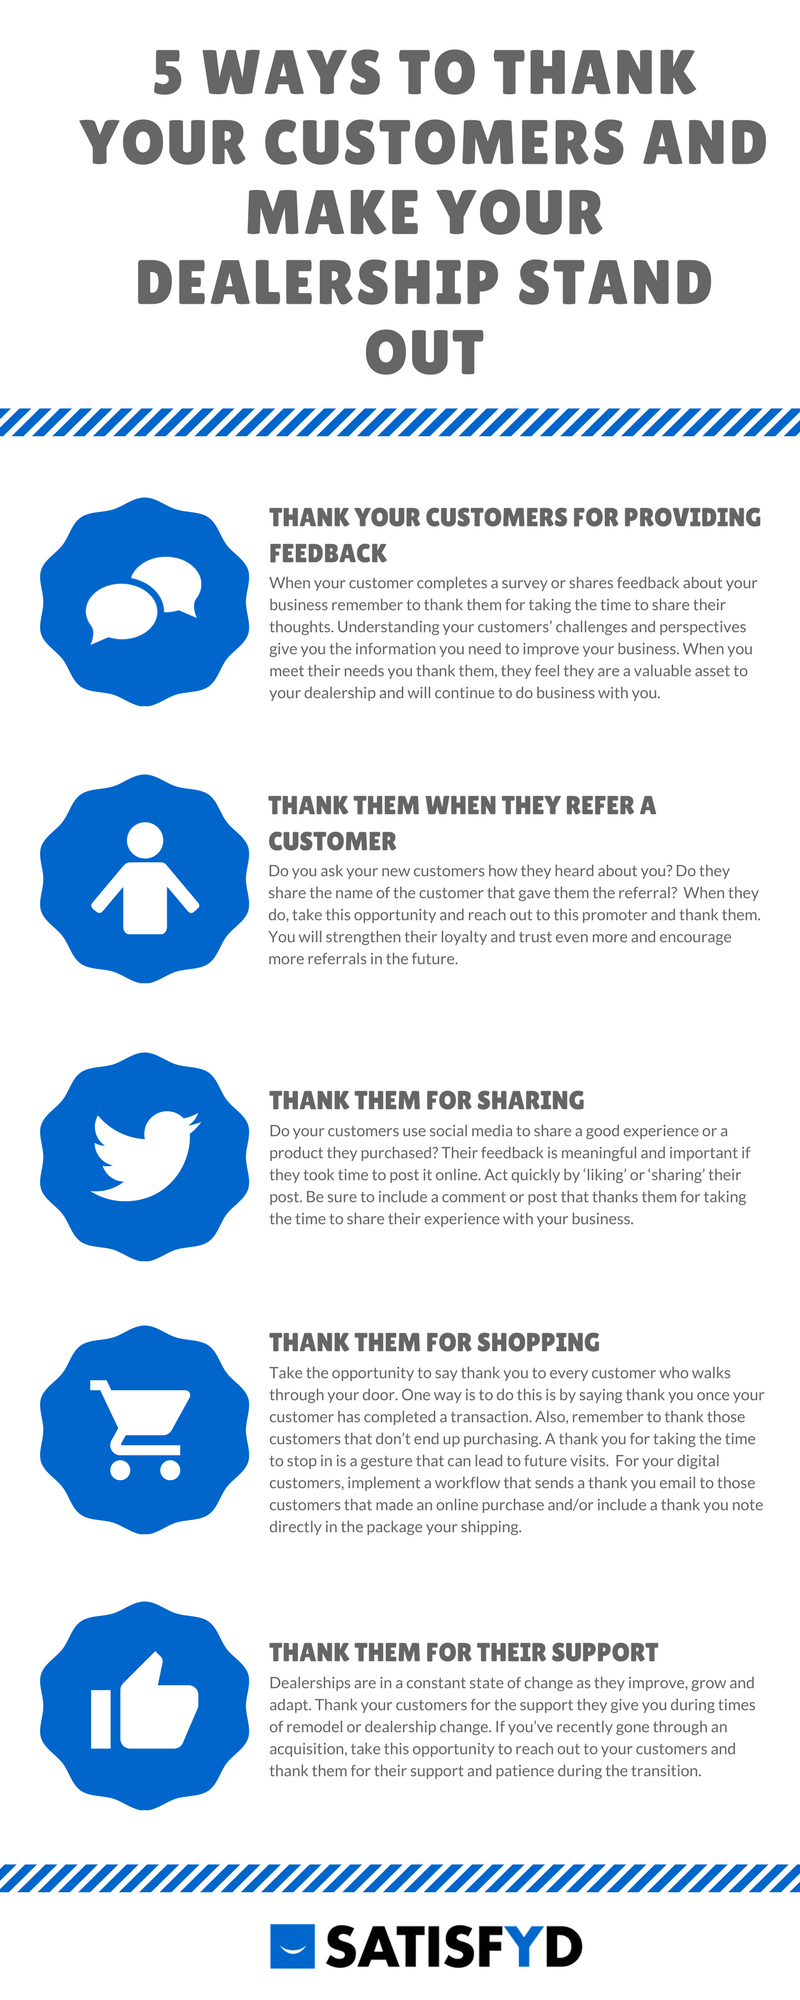 Ways to Thank Your Customers